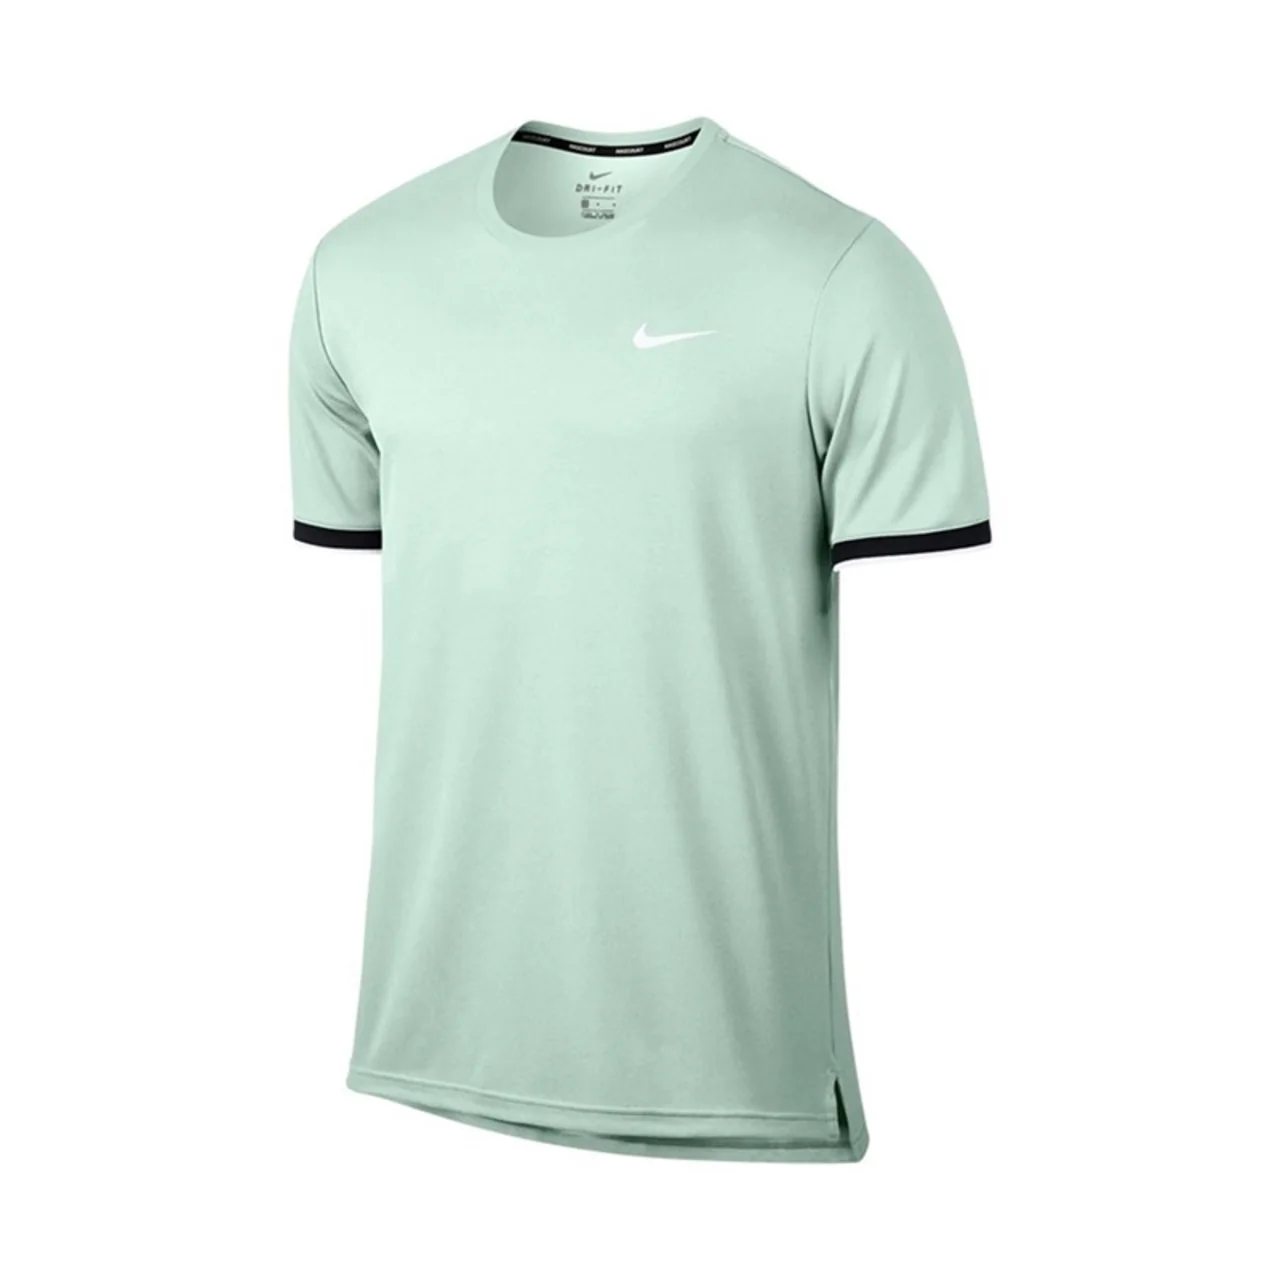 Nike Dry Top Team Green Size S